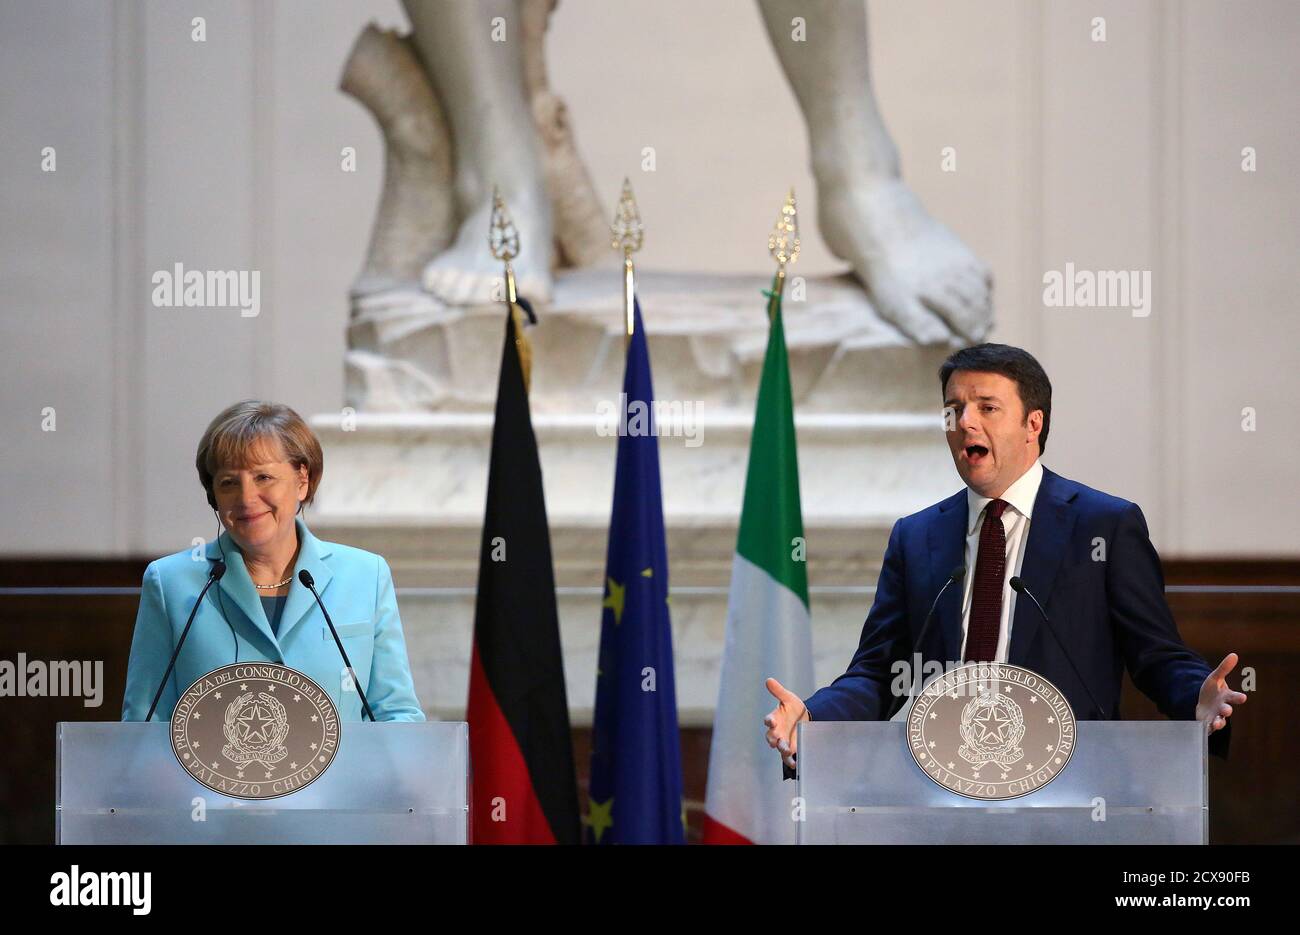 Italy's Prime Minister Matteo Renzi (R) talks during a joint news conference with Germany's Chancellor Angela Merkel at the end of a meeting at the Galleria dell'Accademia in Florence January 23, 2015. REUTERS/Alessandro Bianchi (ITALY - Tags: POLITICS) Stock Photo